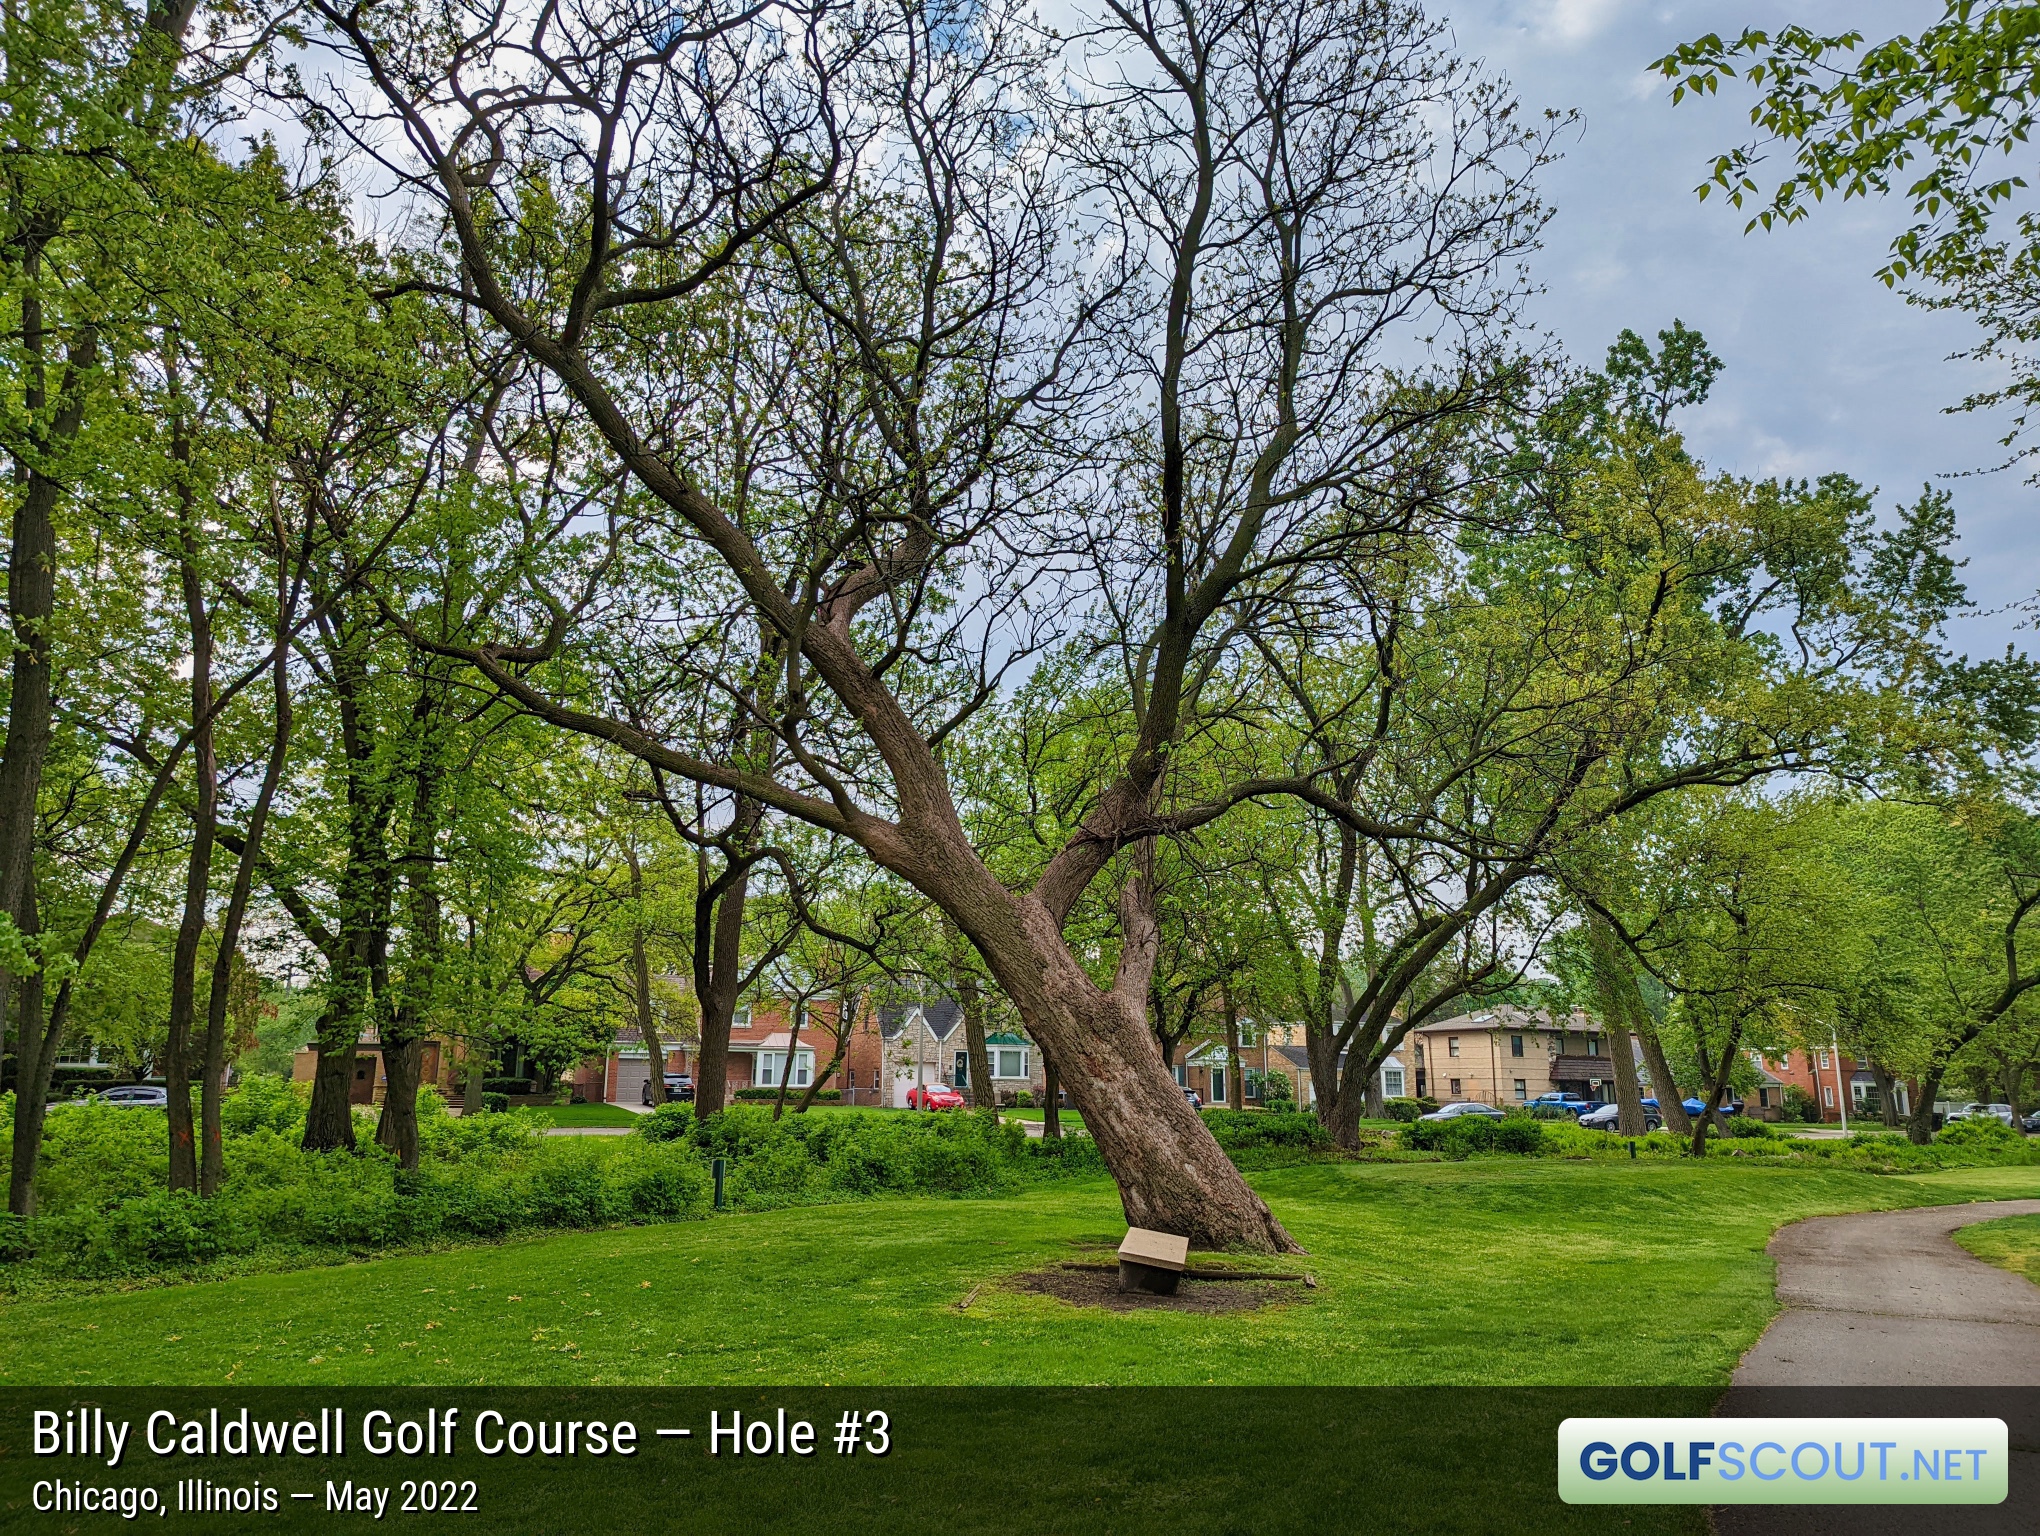 Photo of hole #3 at Billy Caldwell Golf Course in Chicago, Illinois. 